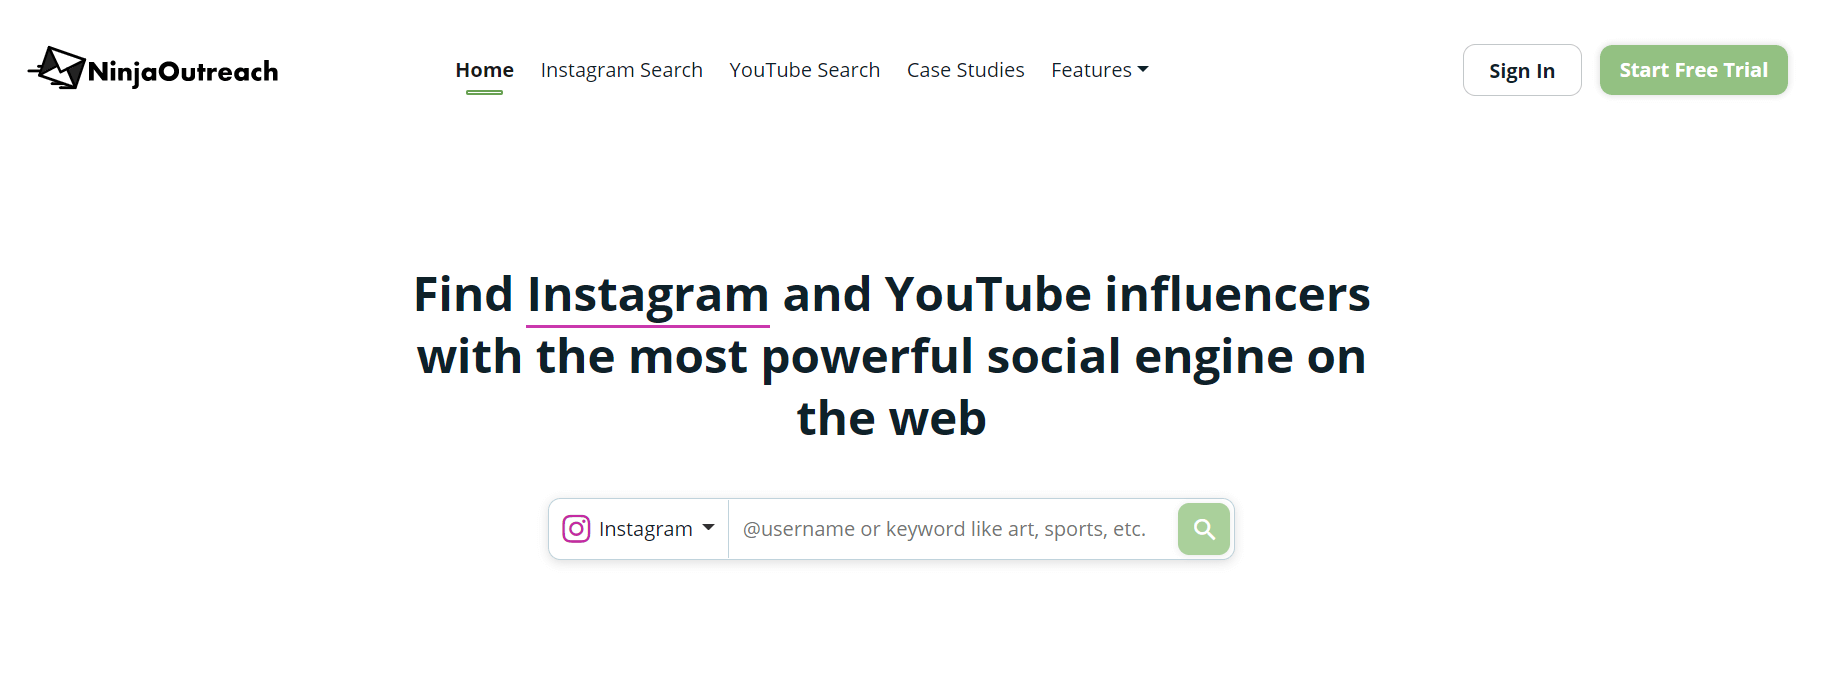 influencer research tool